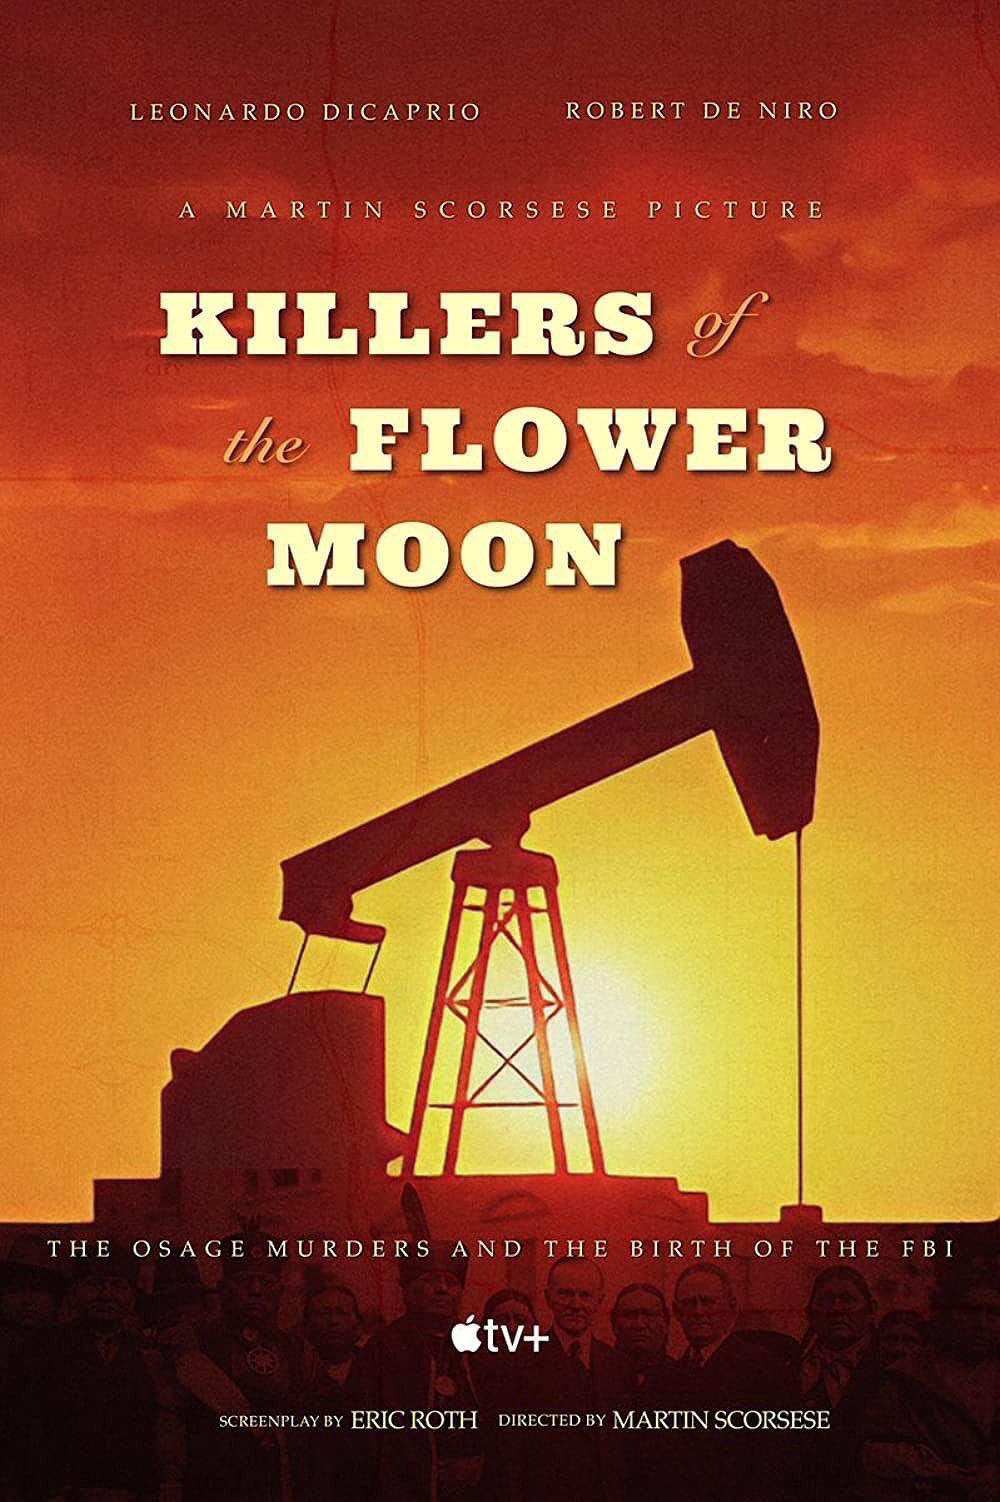 Killers of the Flower Moon review